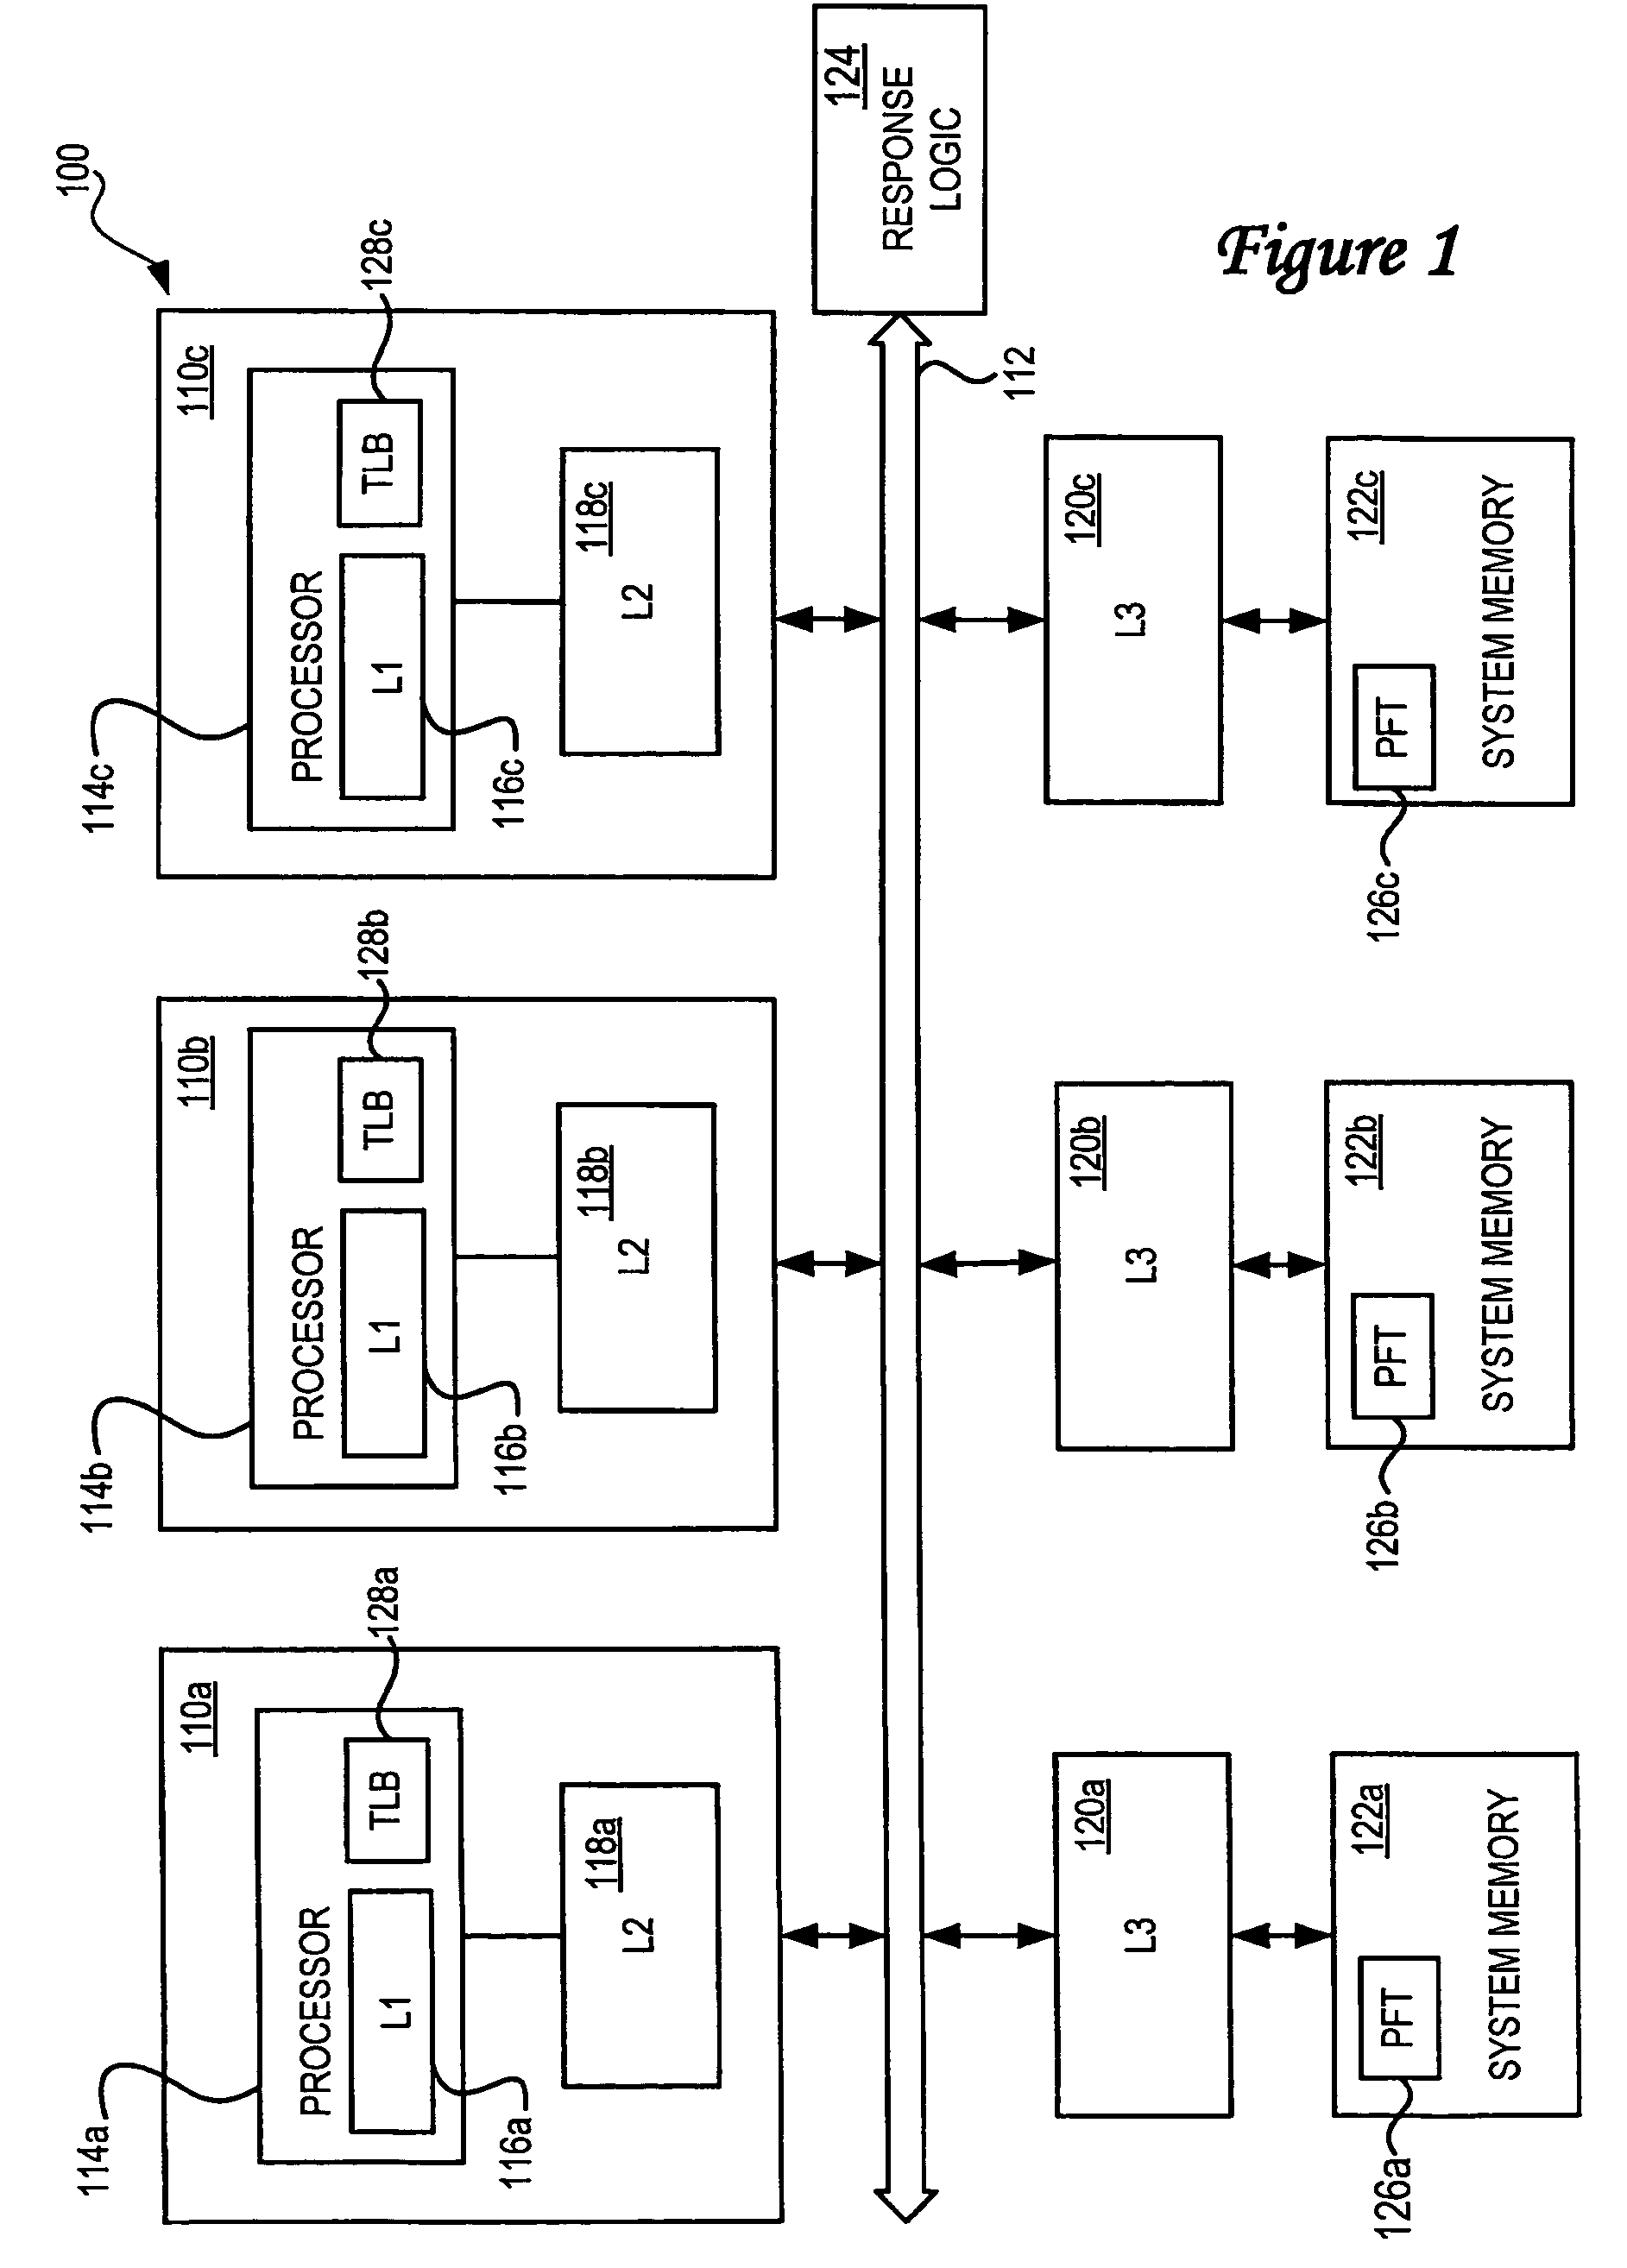 System, method and computer program product for application-level cache-mapping awareness and reallocation requests